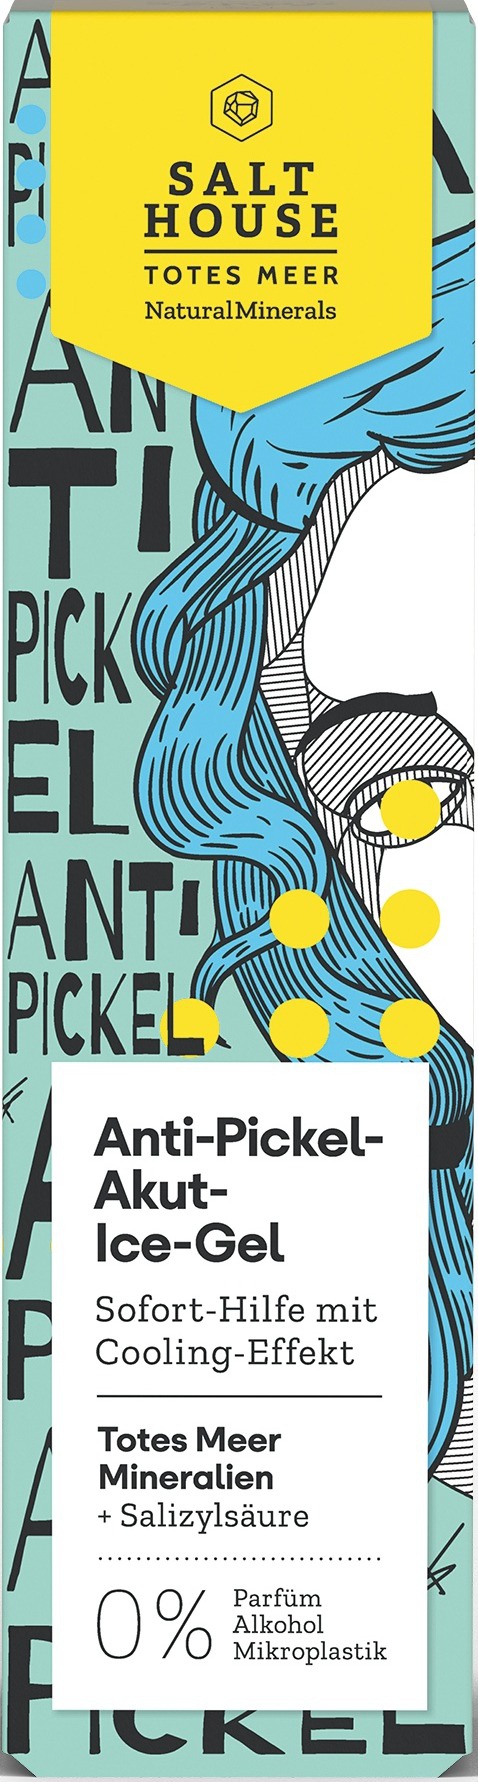 Salthouse Natural Minerals Anti Pickel Akut Ice Gel